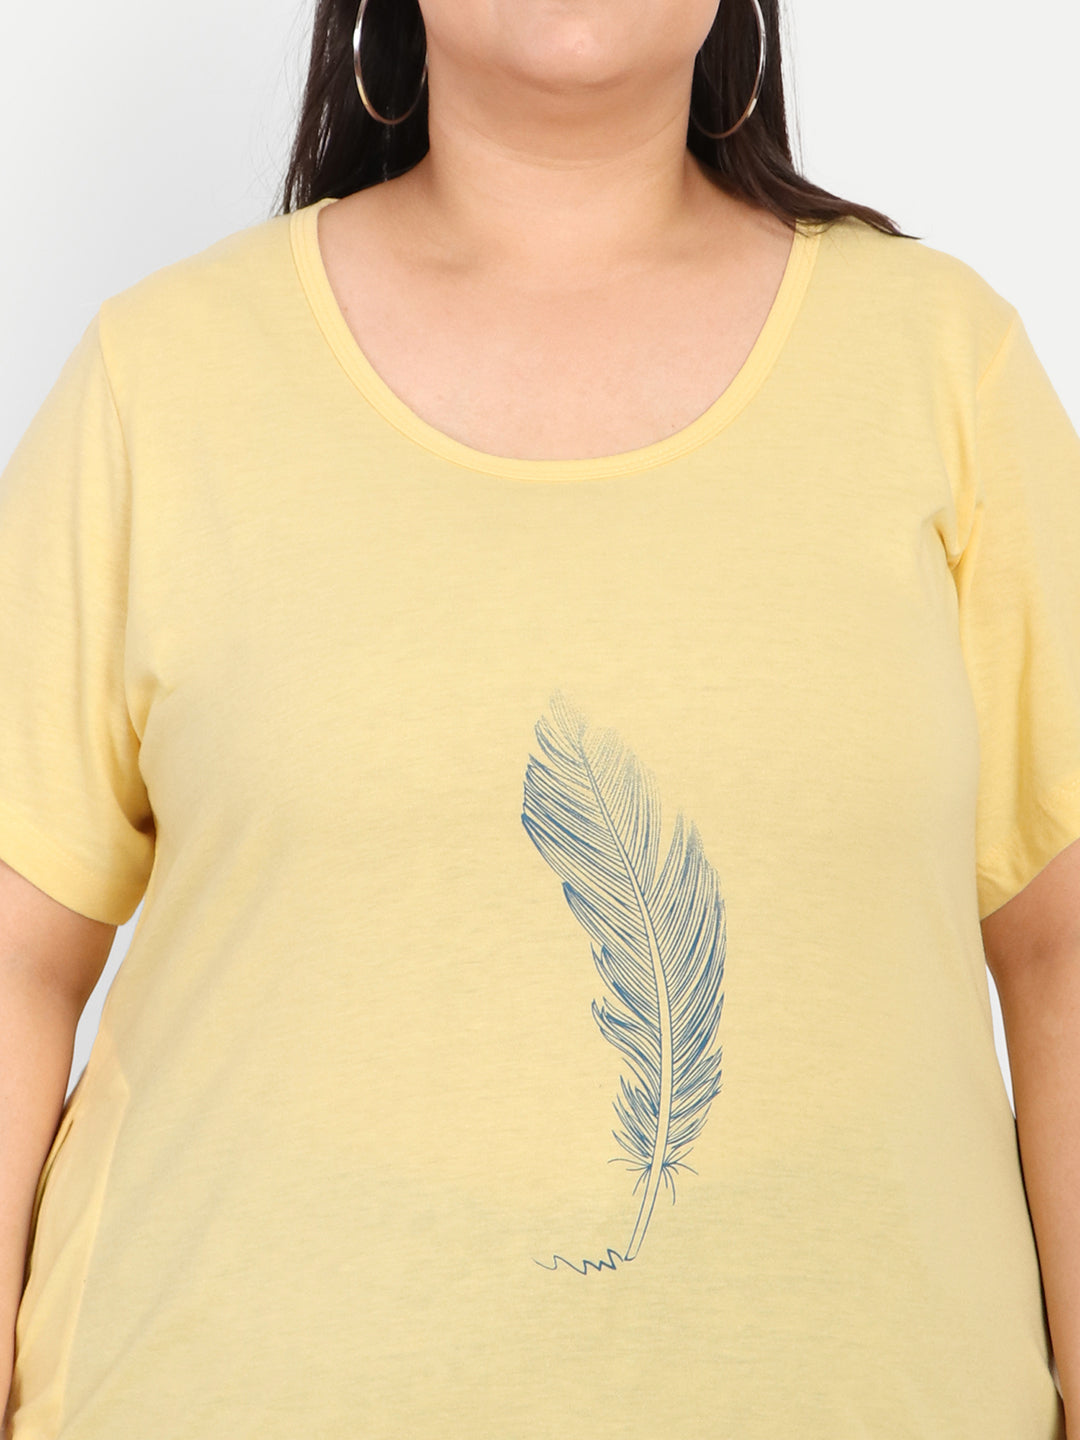 Comfy Lemon Yellow Printed Cotton Long T-shirt For Women (Half Sleeves) Online In India